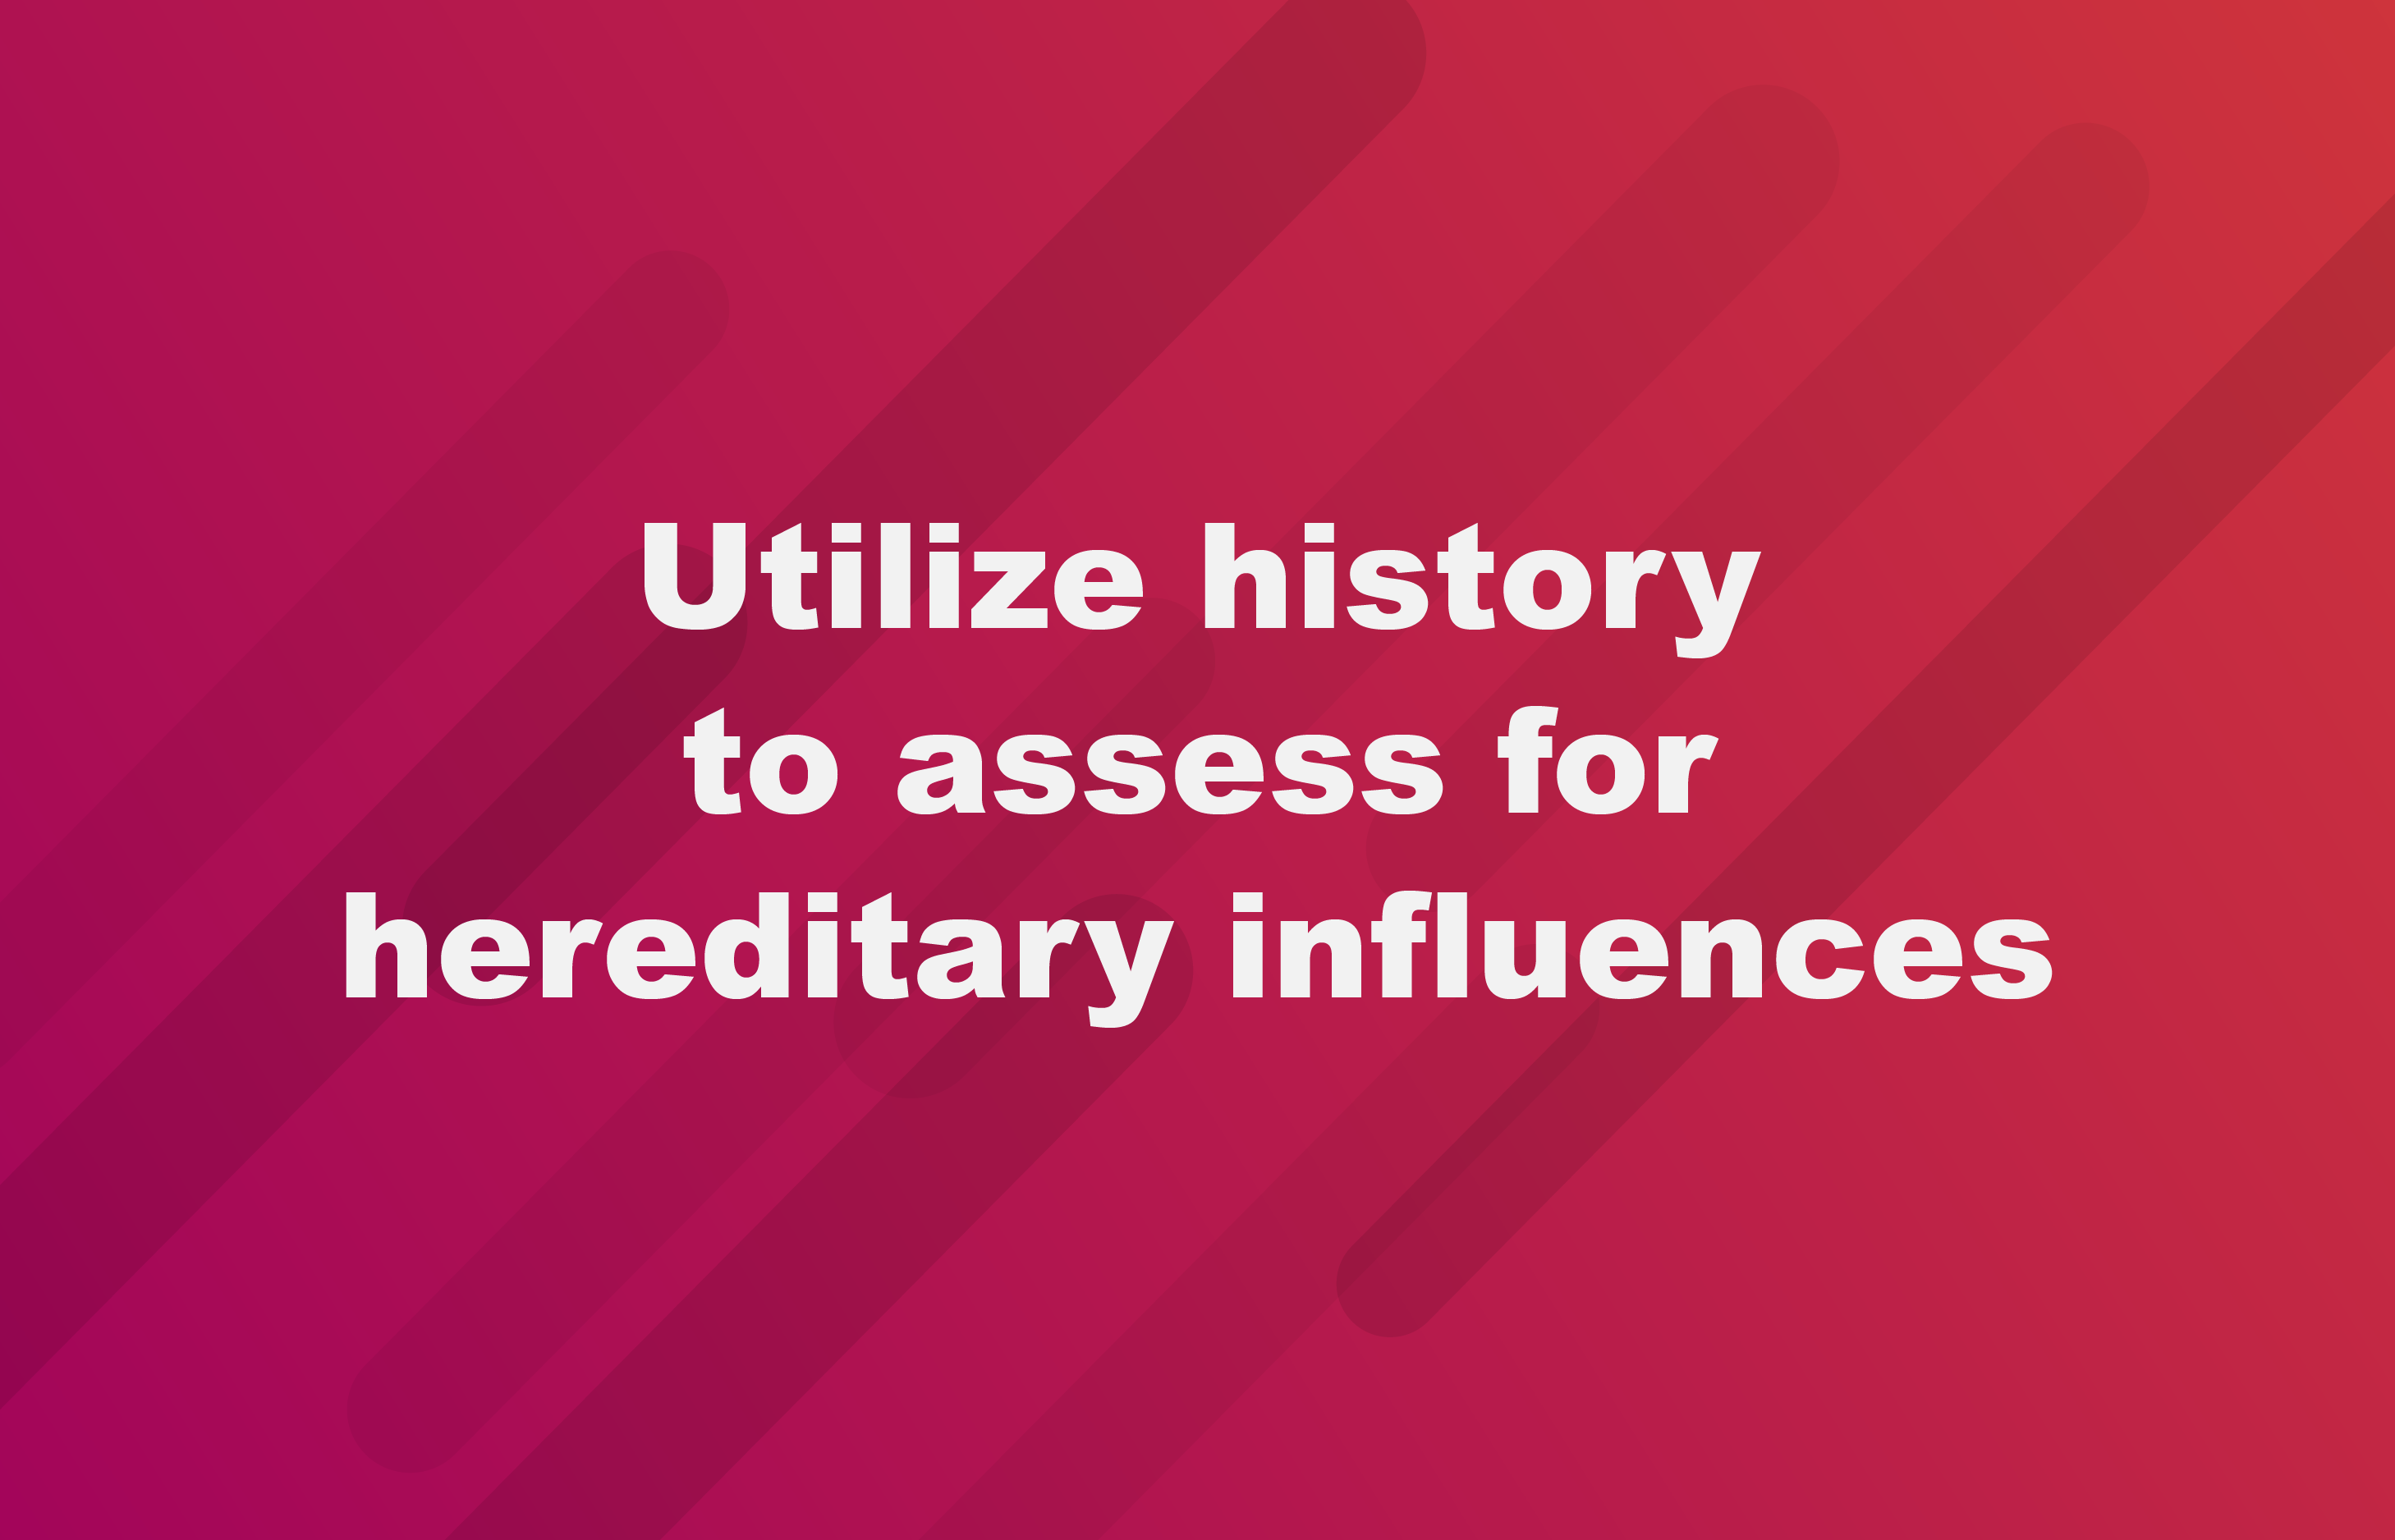 Utilize history to assess for hereditary influences